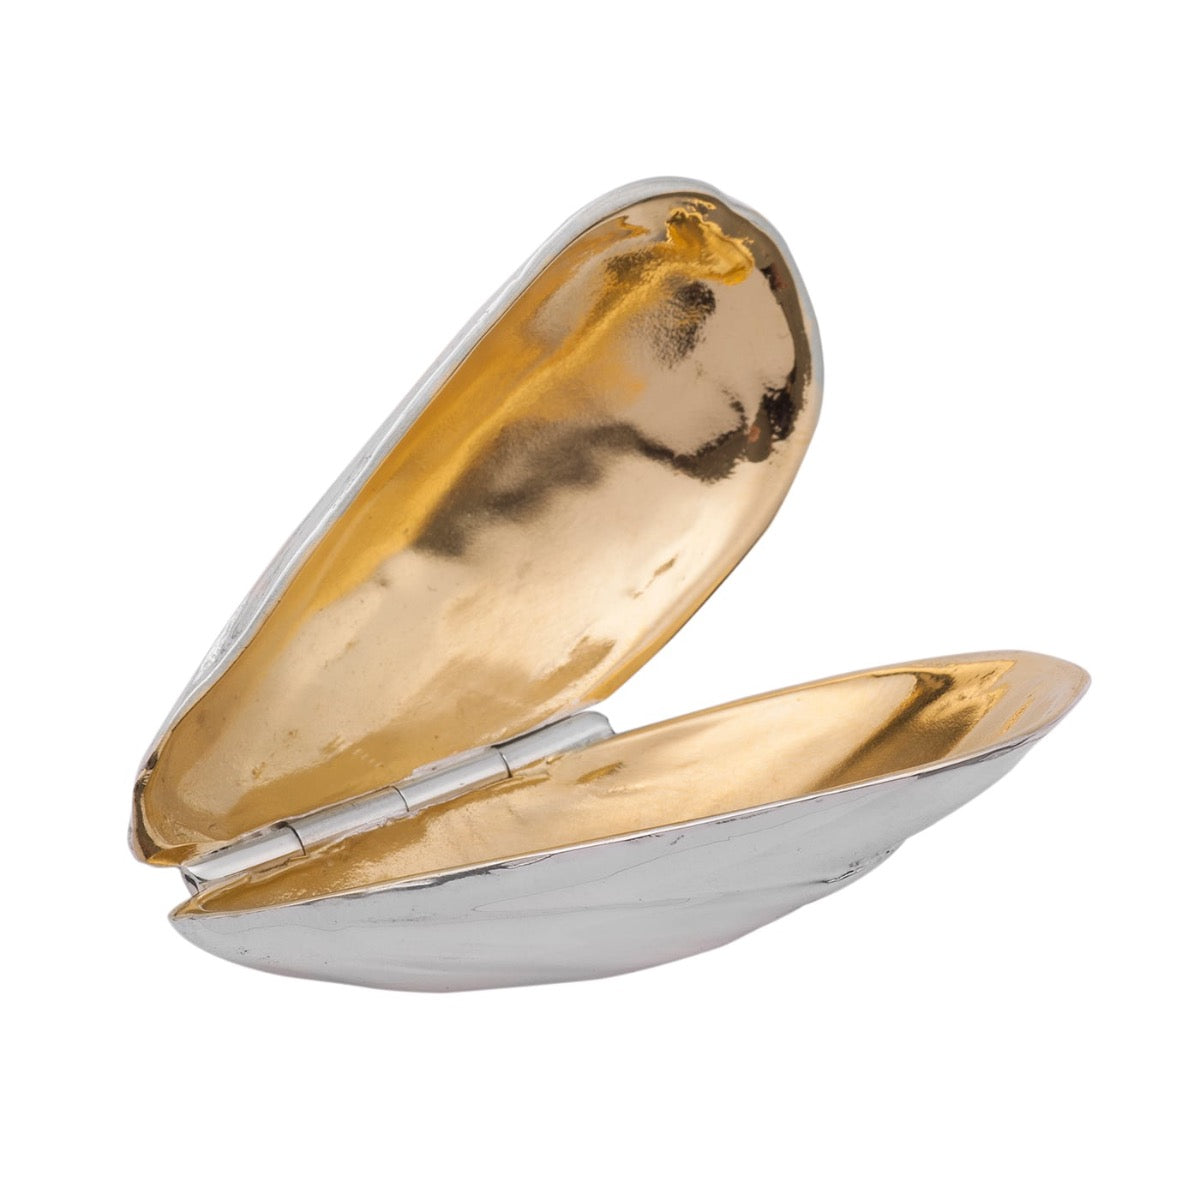 Solid silver mussel eater